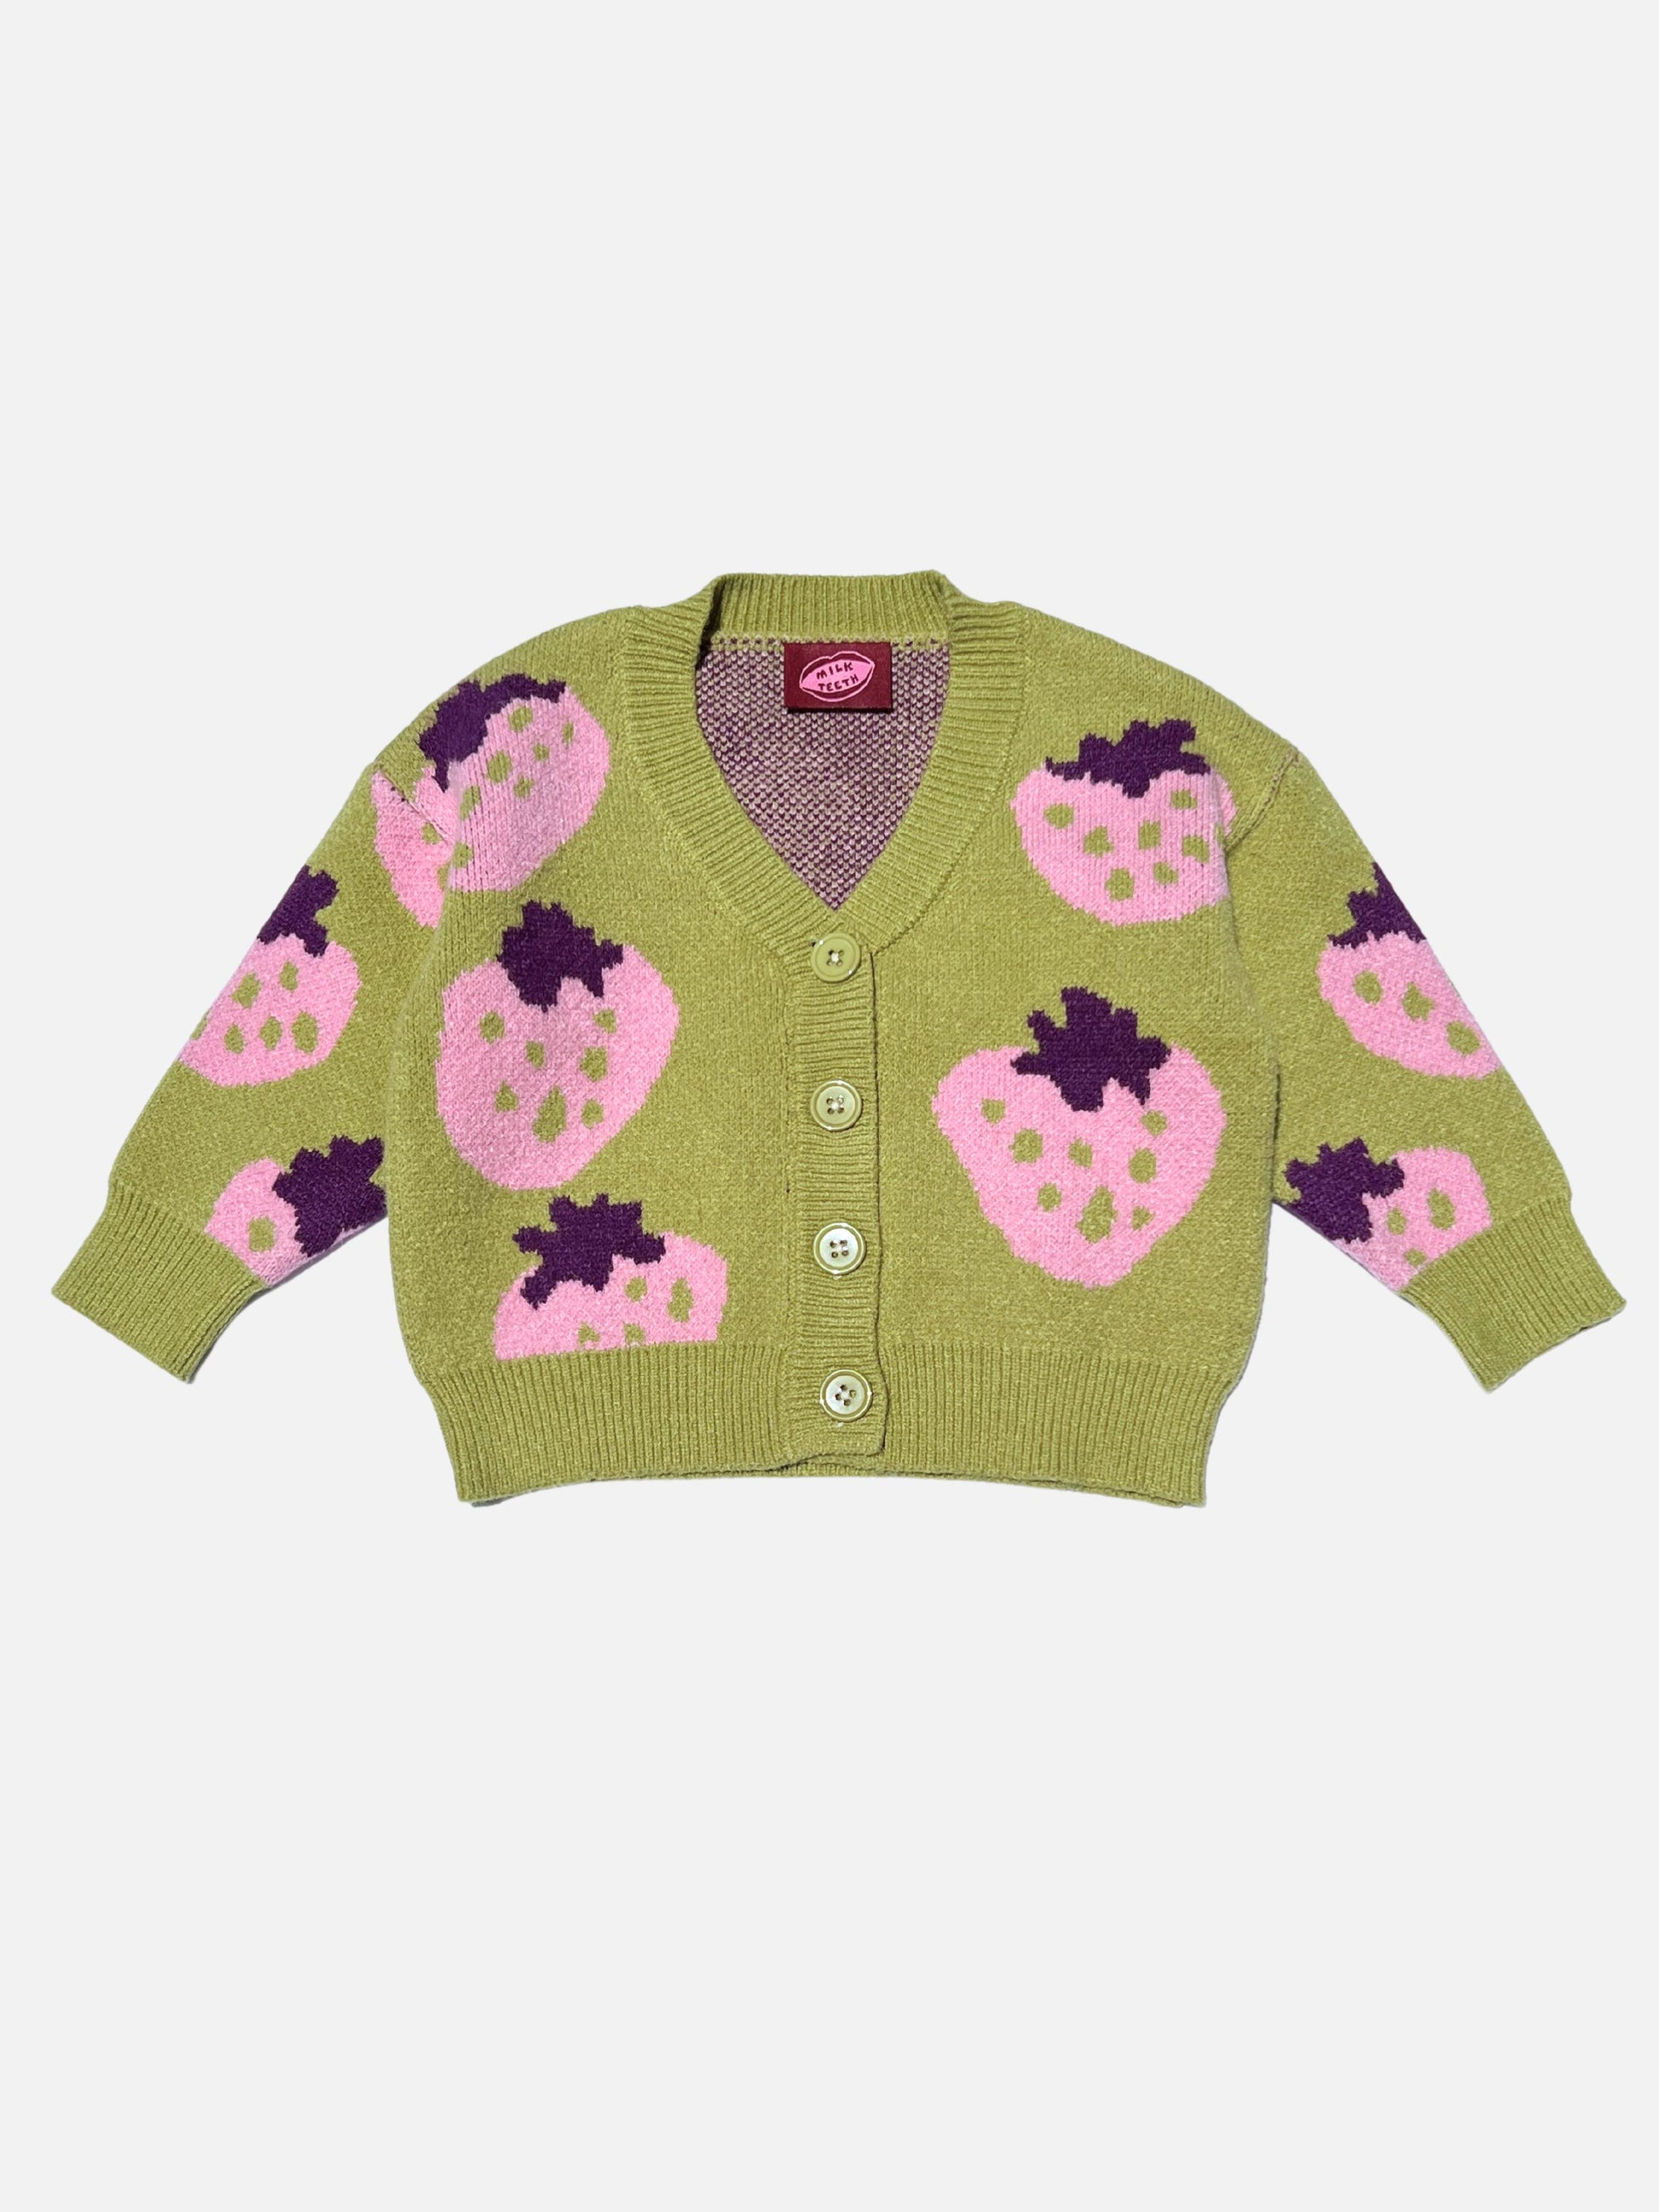 Front view of a kids v-neck cardigan in pistachio green with an all-over pattern of large pink strawberries with a purple leaf. Cardigan has 4 buttons.